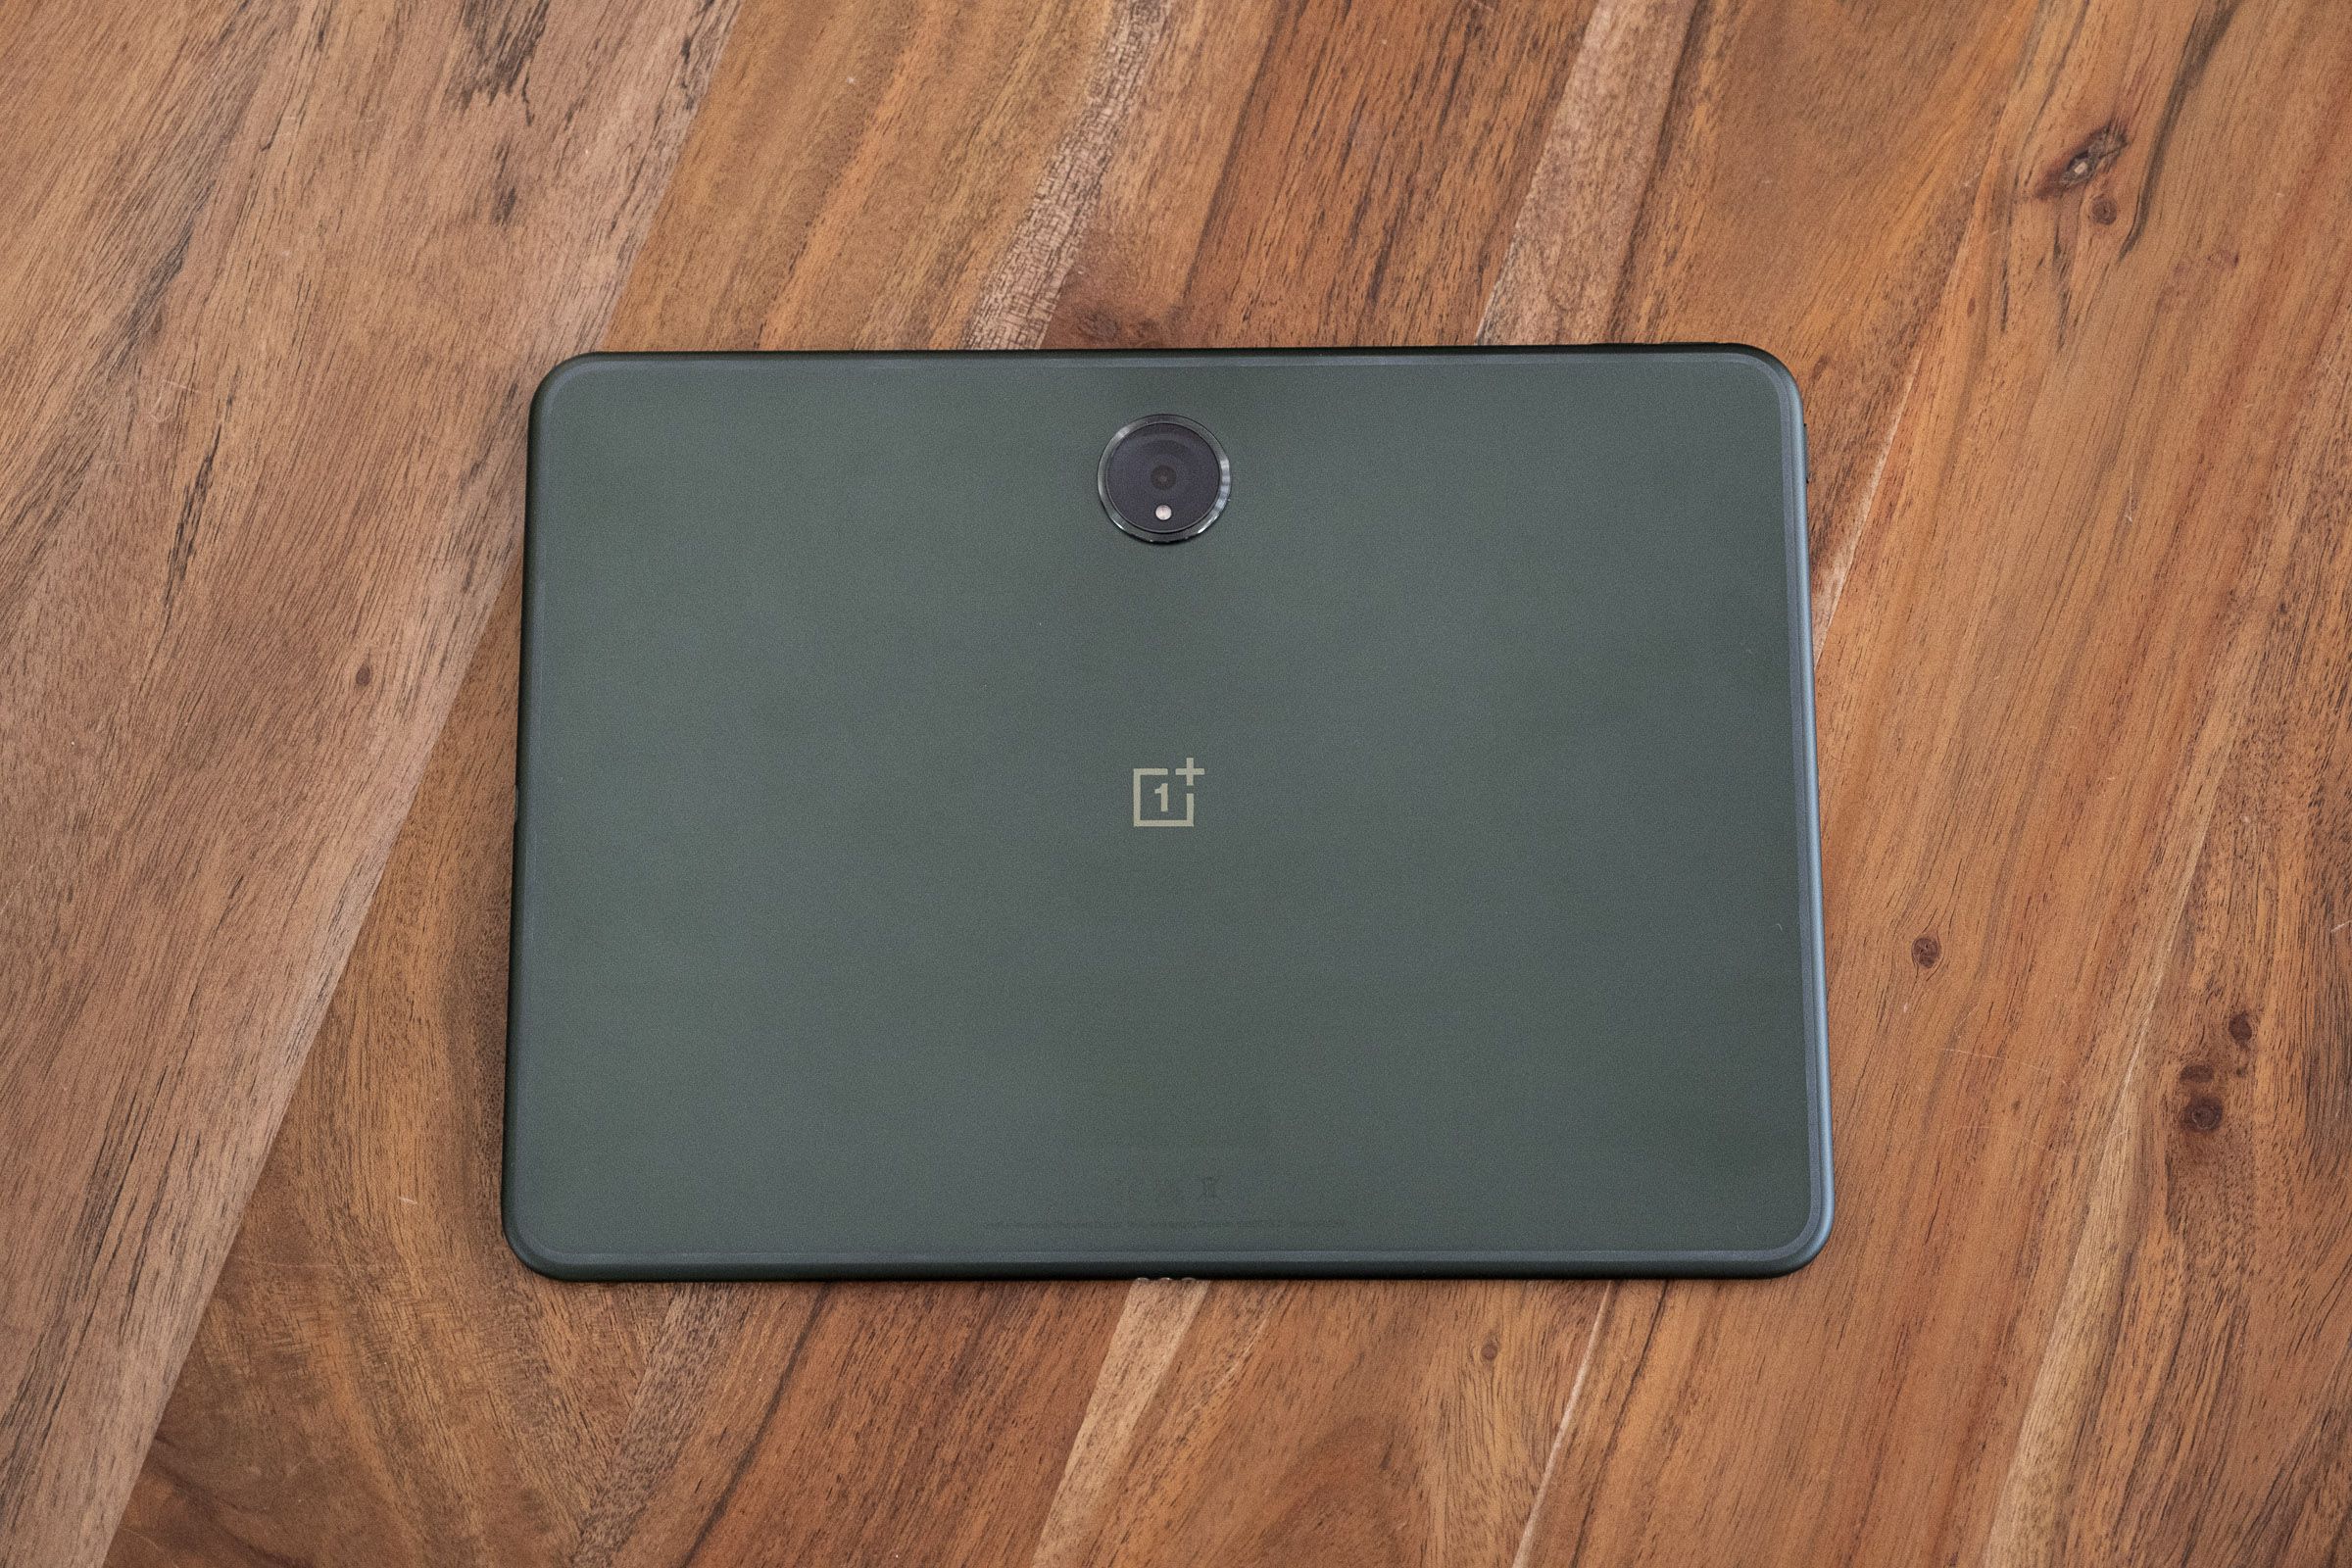 A view of the back of the OnePlus Pad